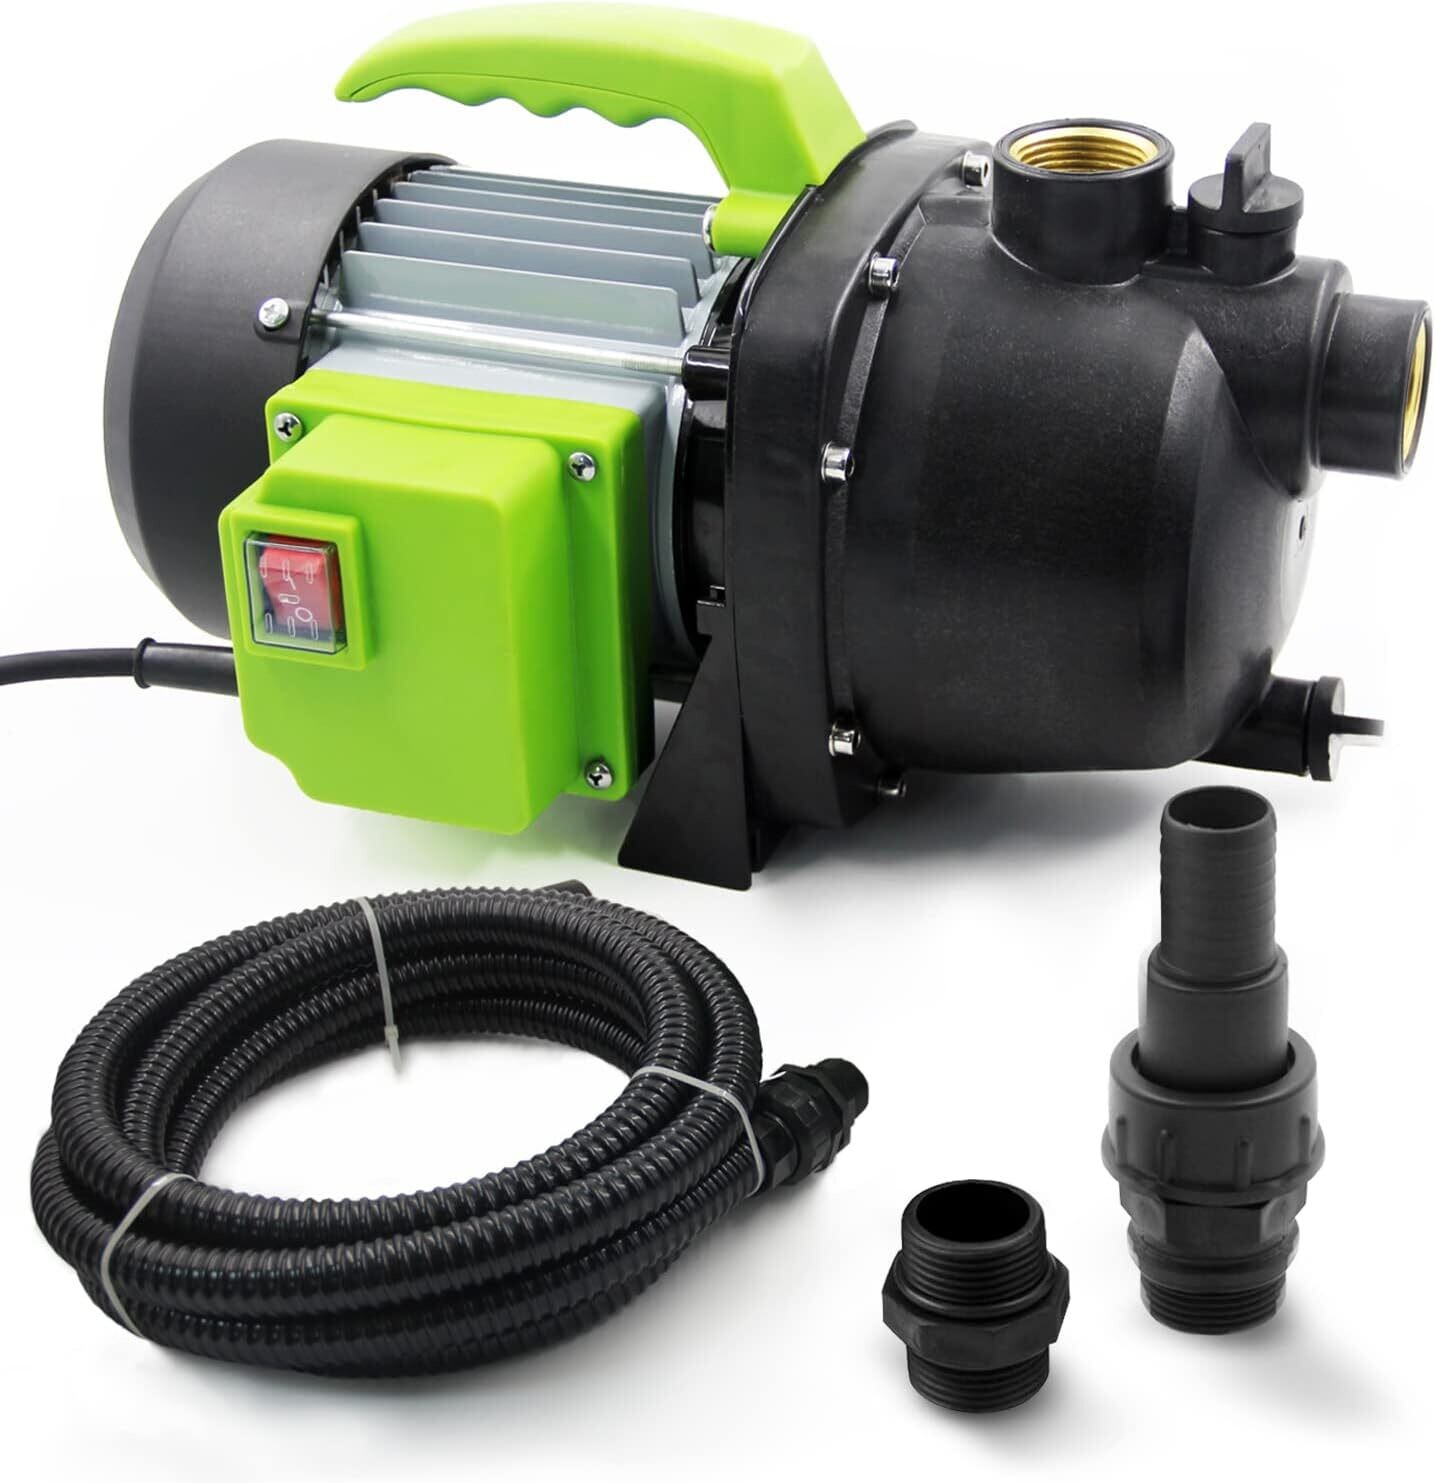 800W Self-Priming Pump Transfer Clean Water for Home Lawn Irrigation Sprinkling, Portable Garden Booster Pump